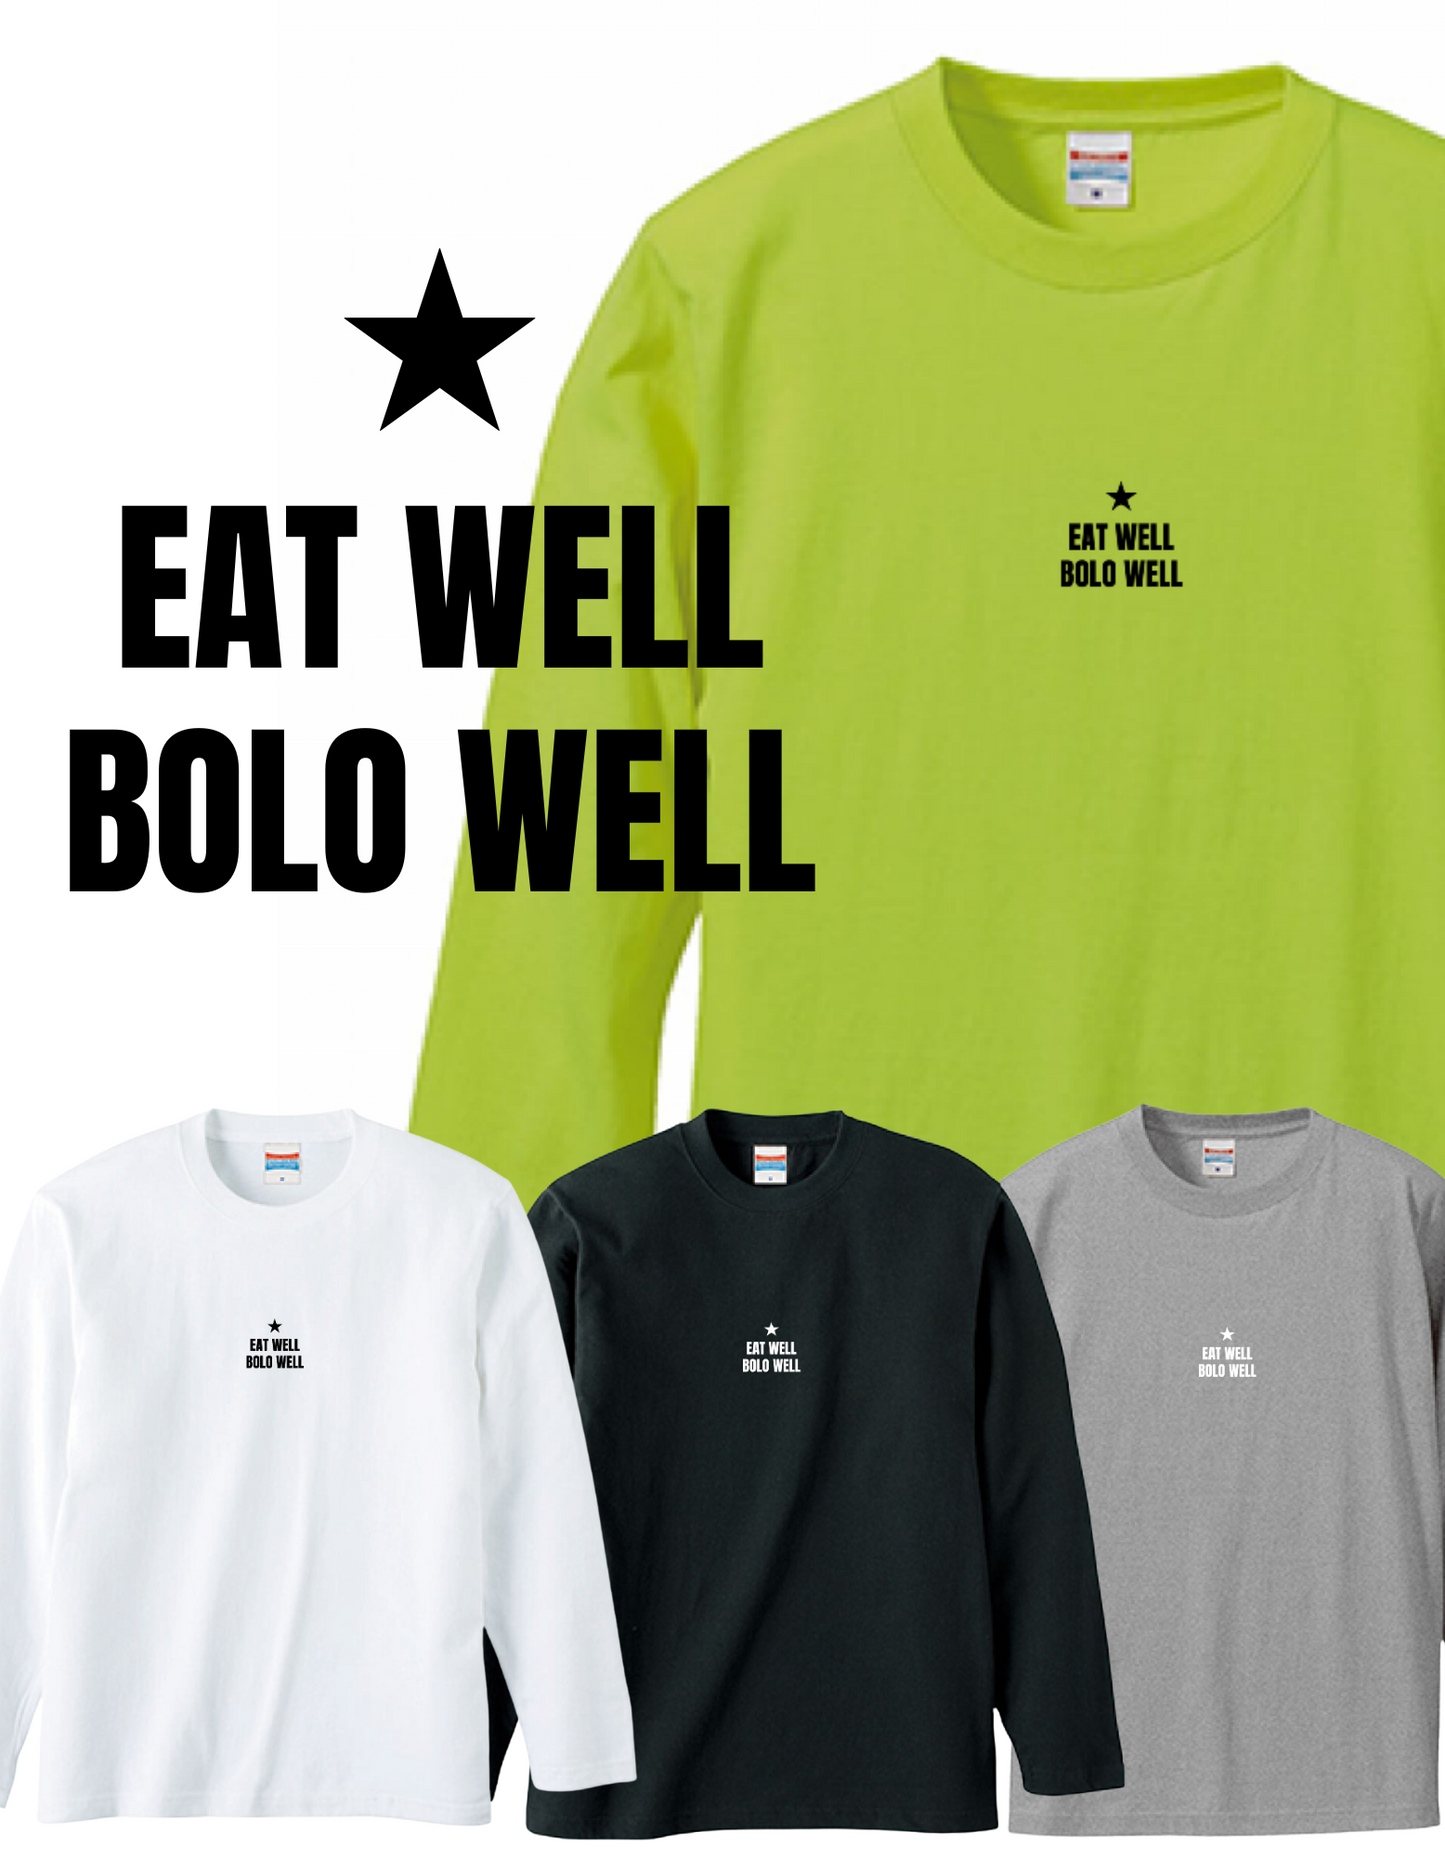 EAT WELL ★ BOLO WELL